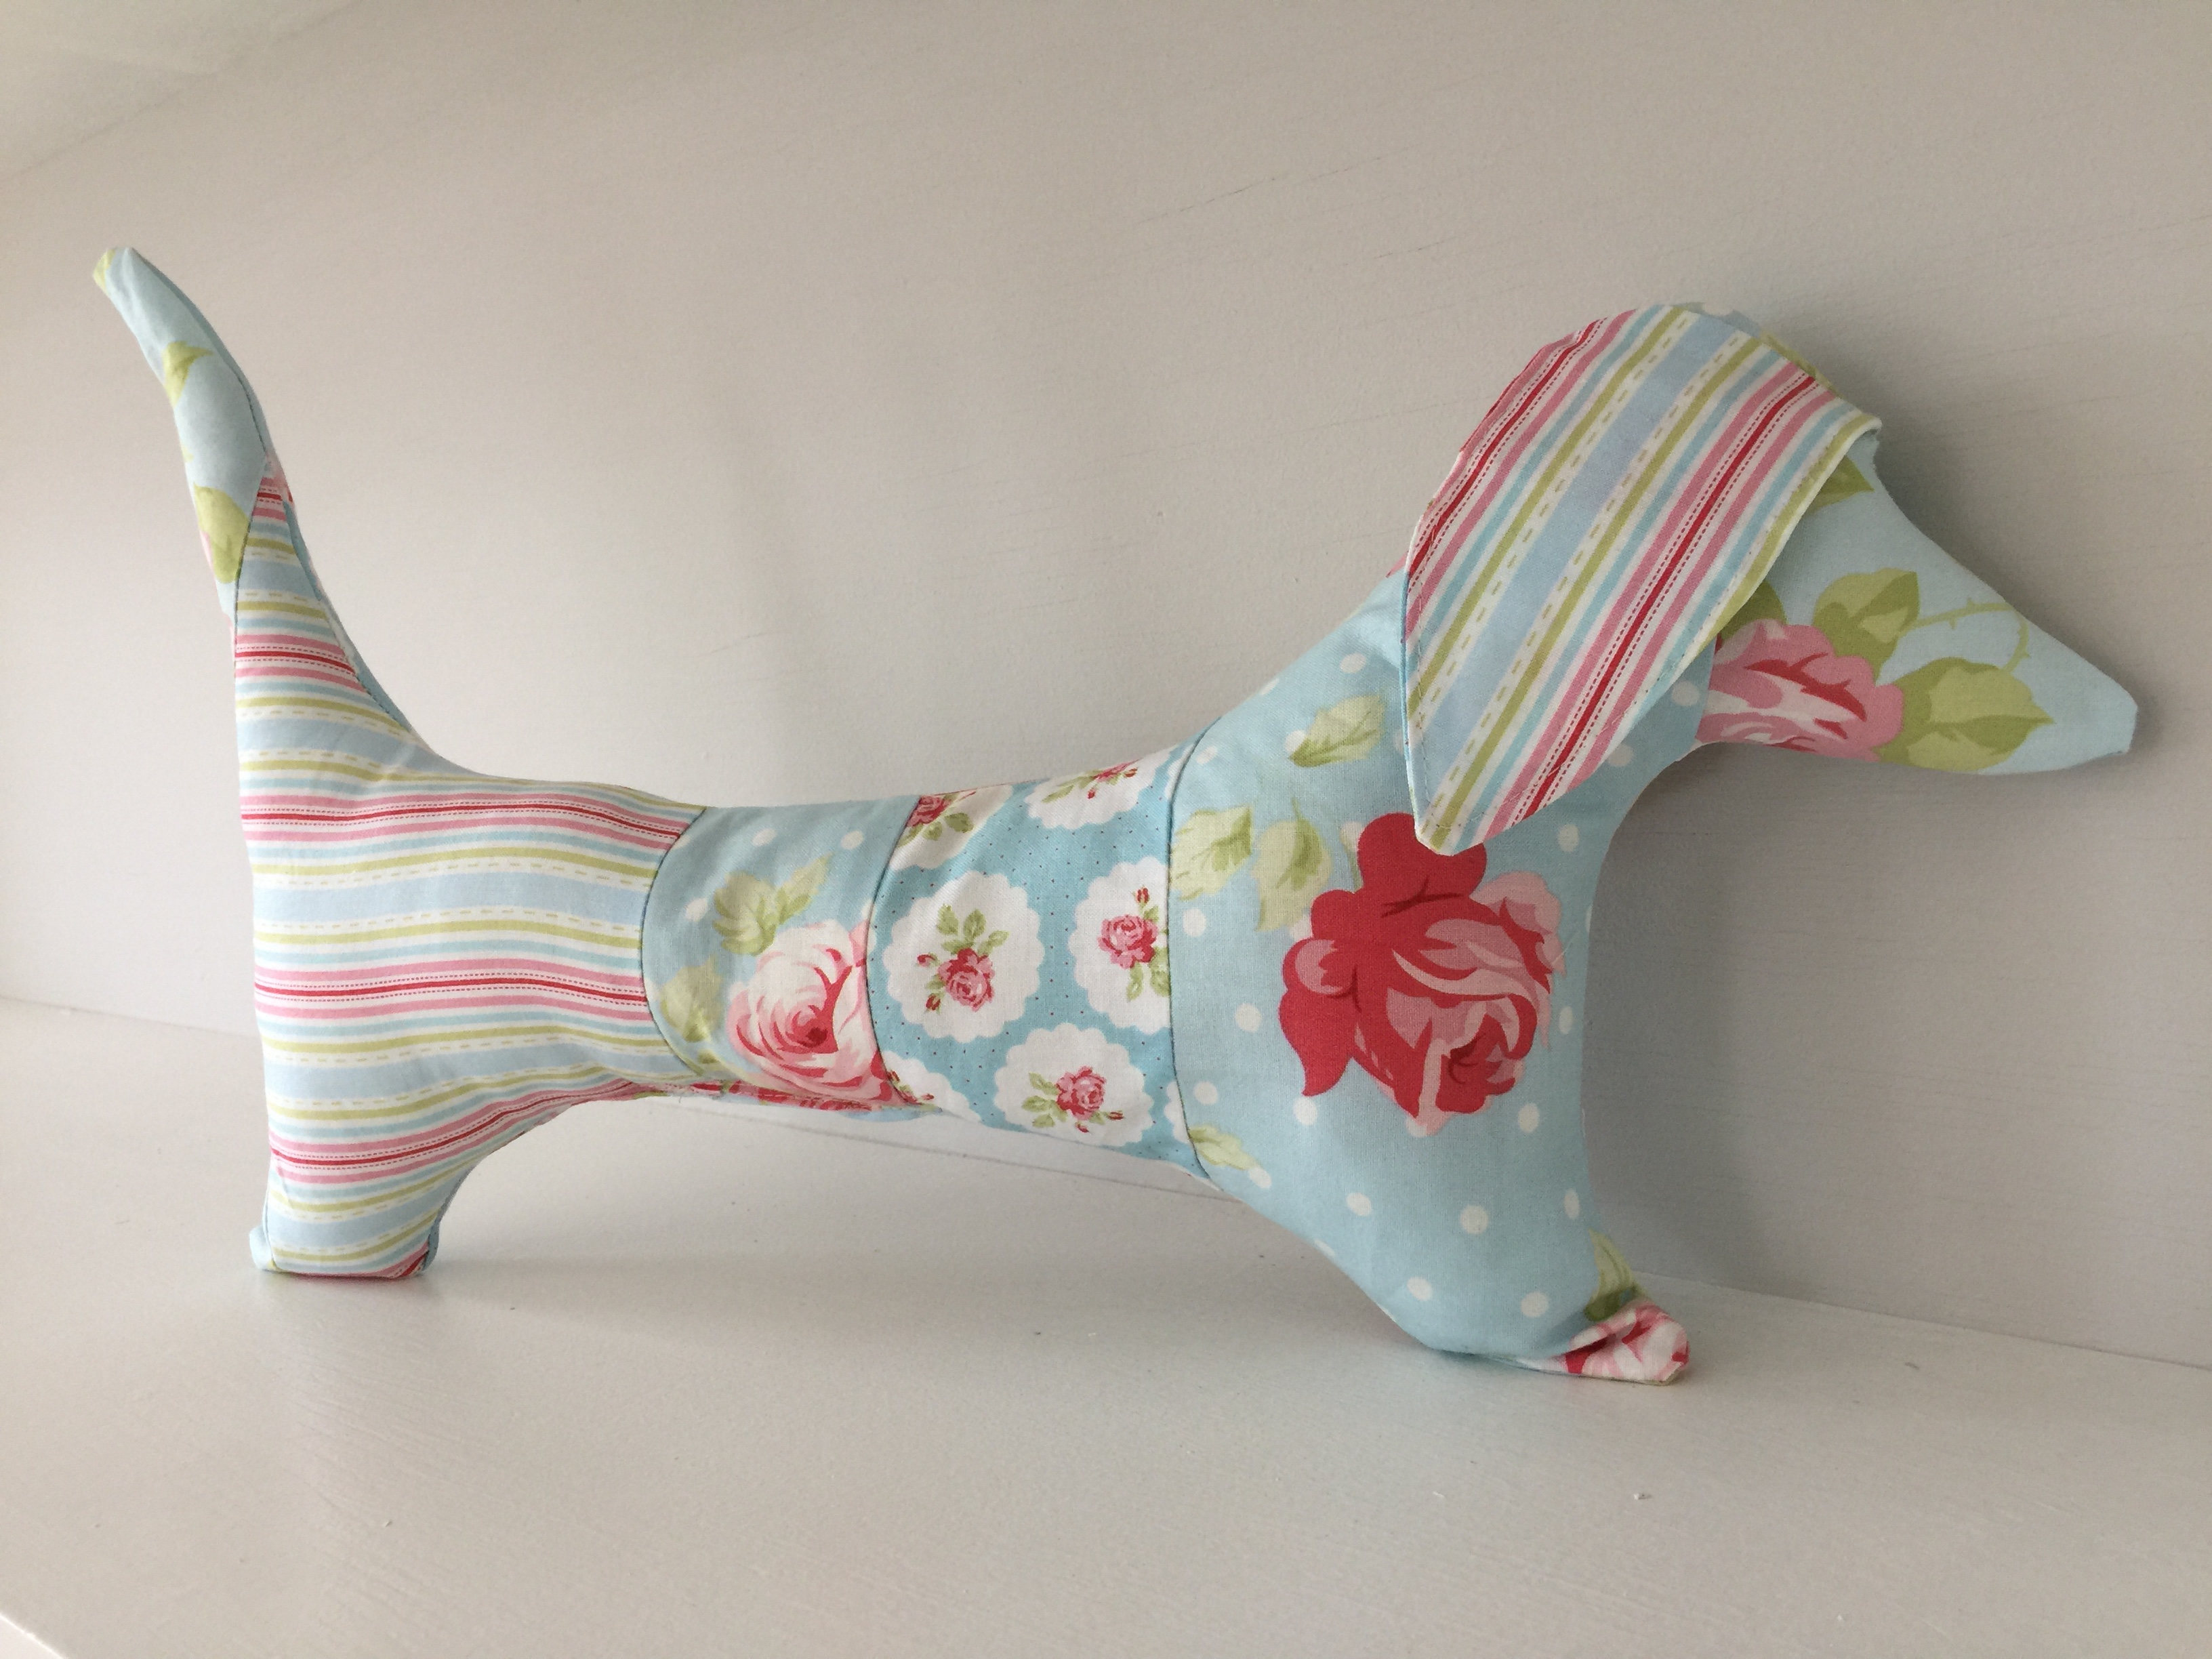 How to sew a dachshund dog pattern